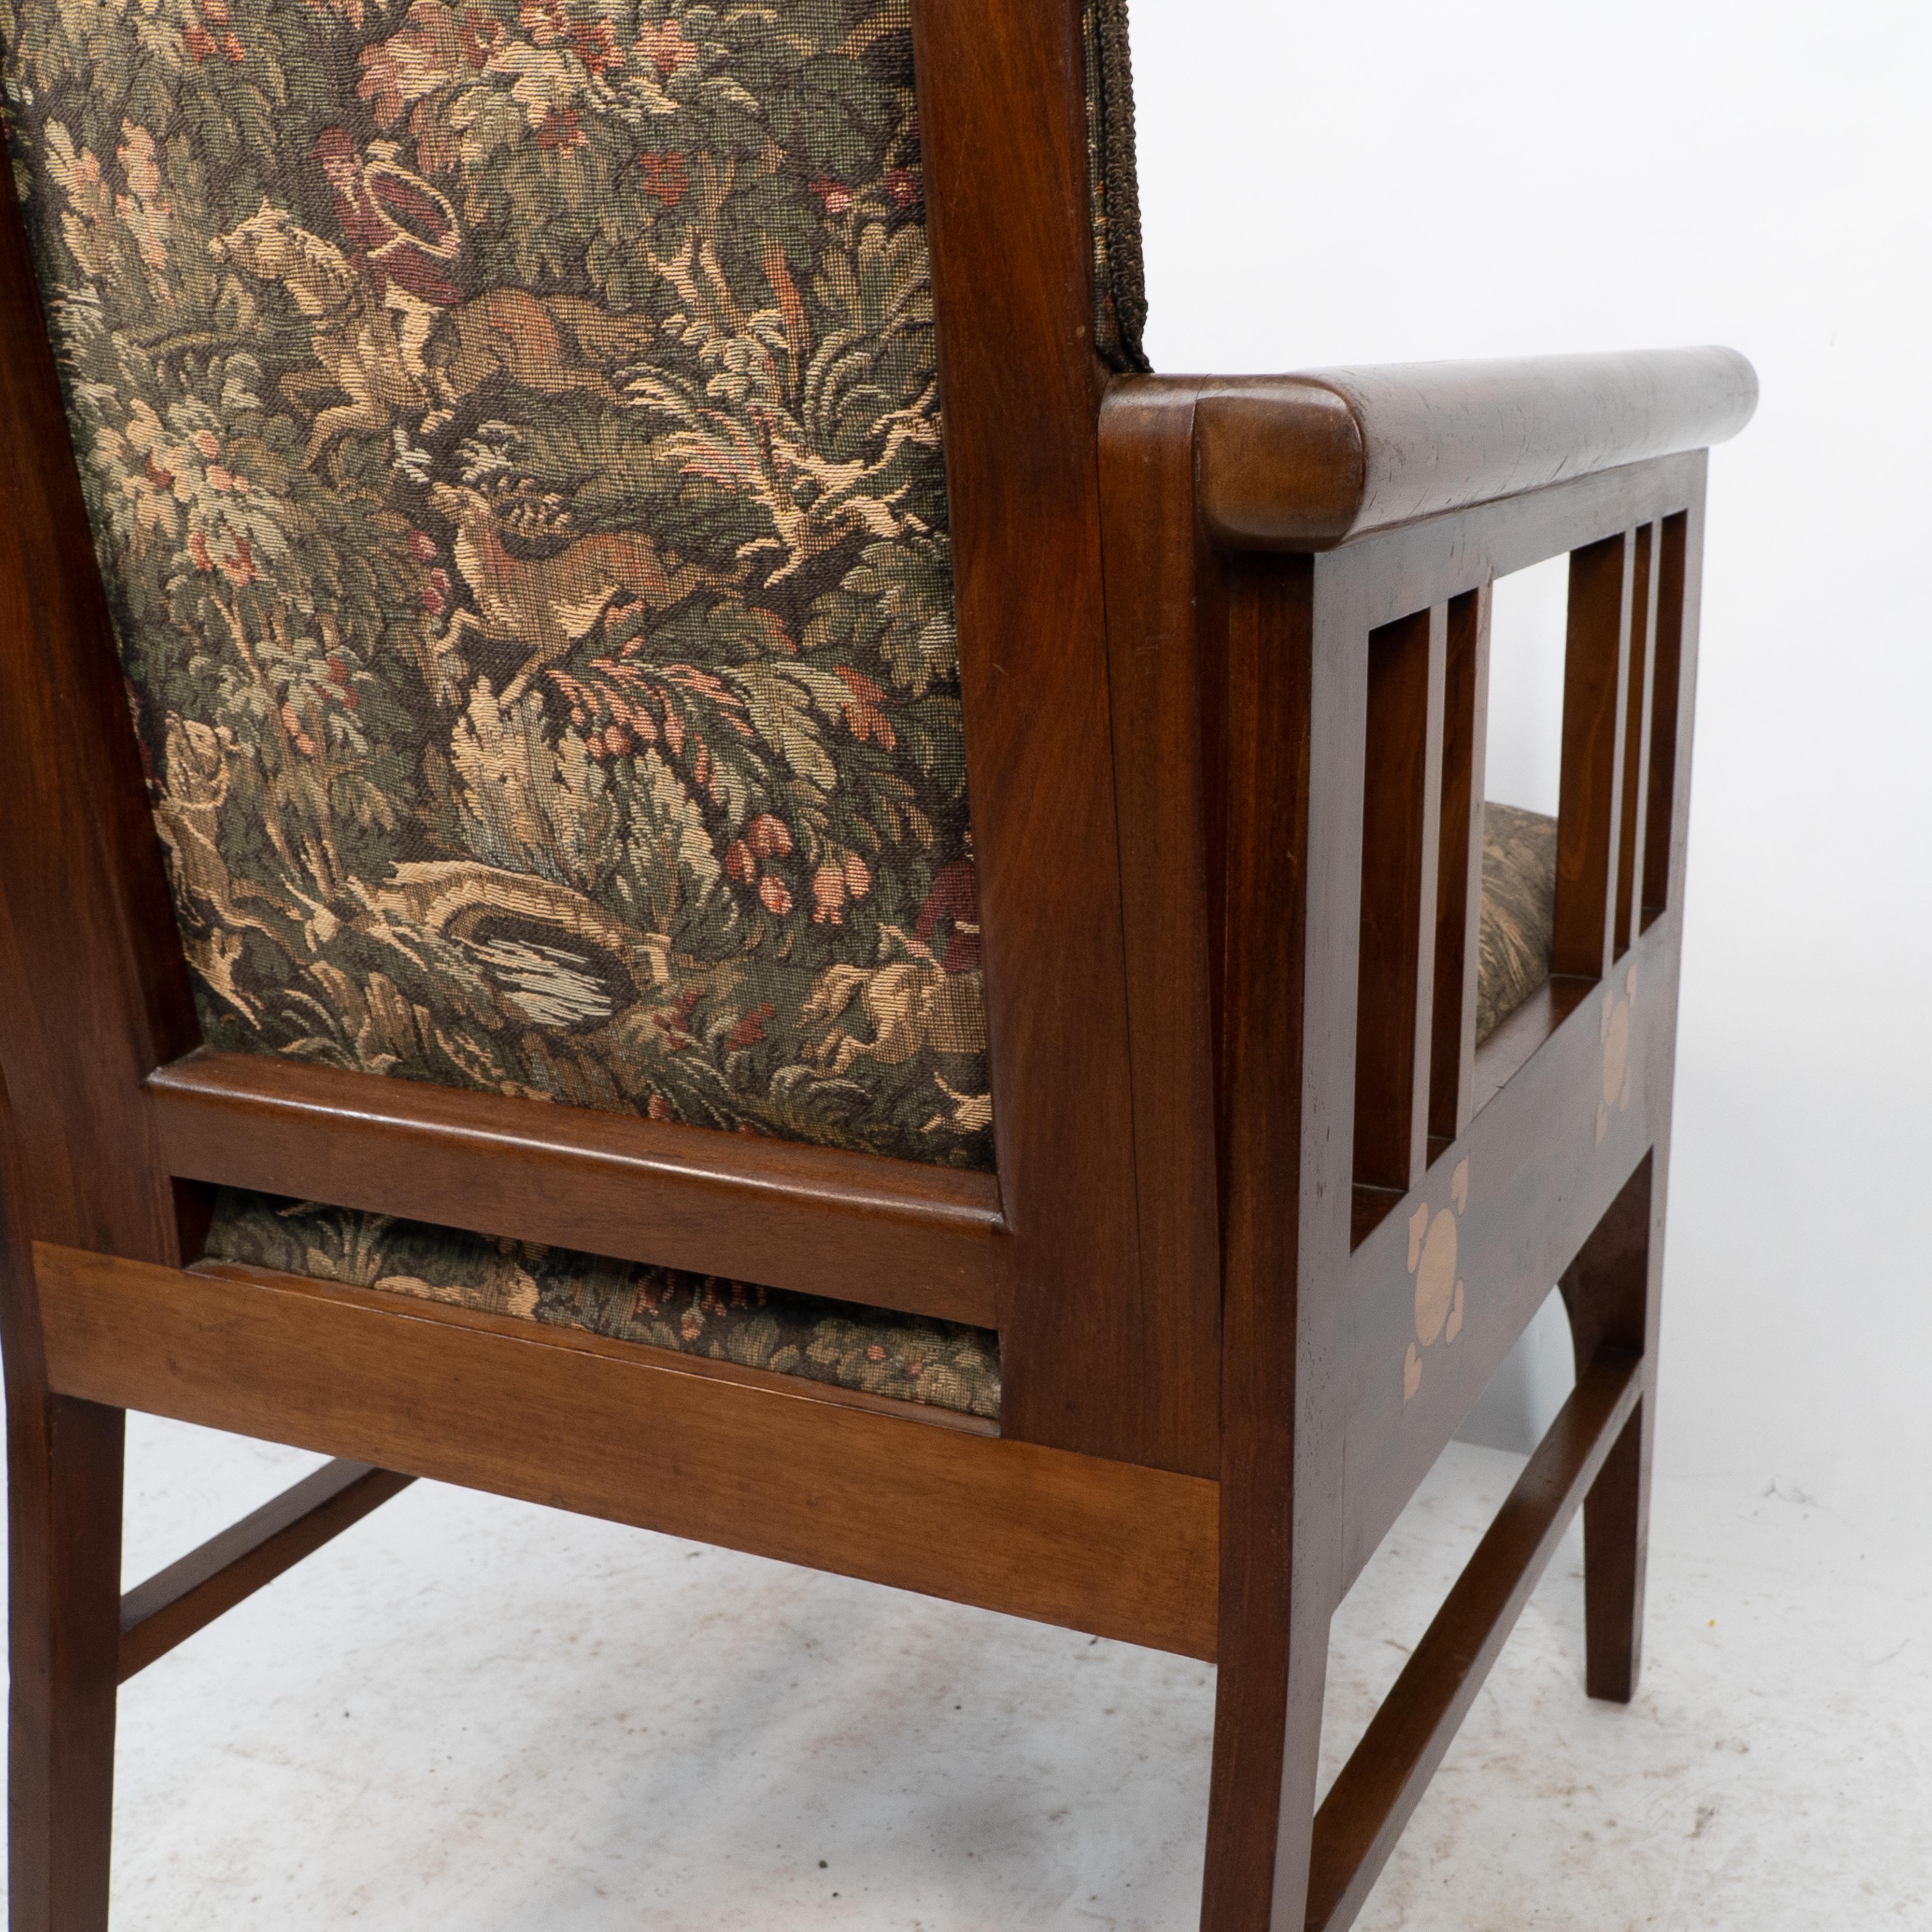 G M Ellwood for J S Henry. A Progressive New Art armchair with fruitwood inlays For Sale 11